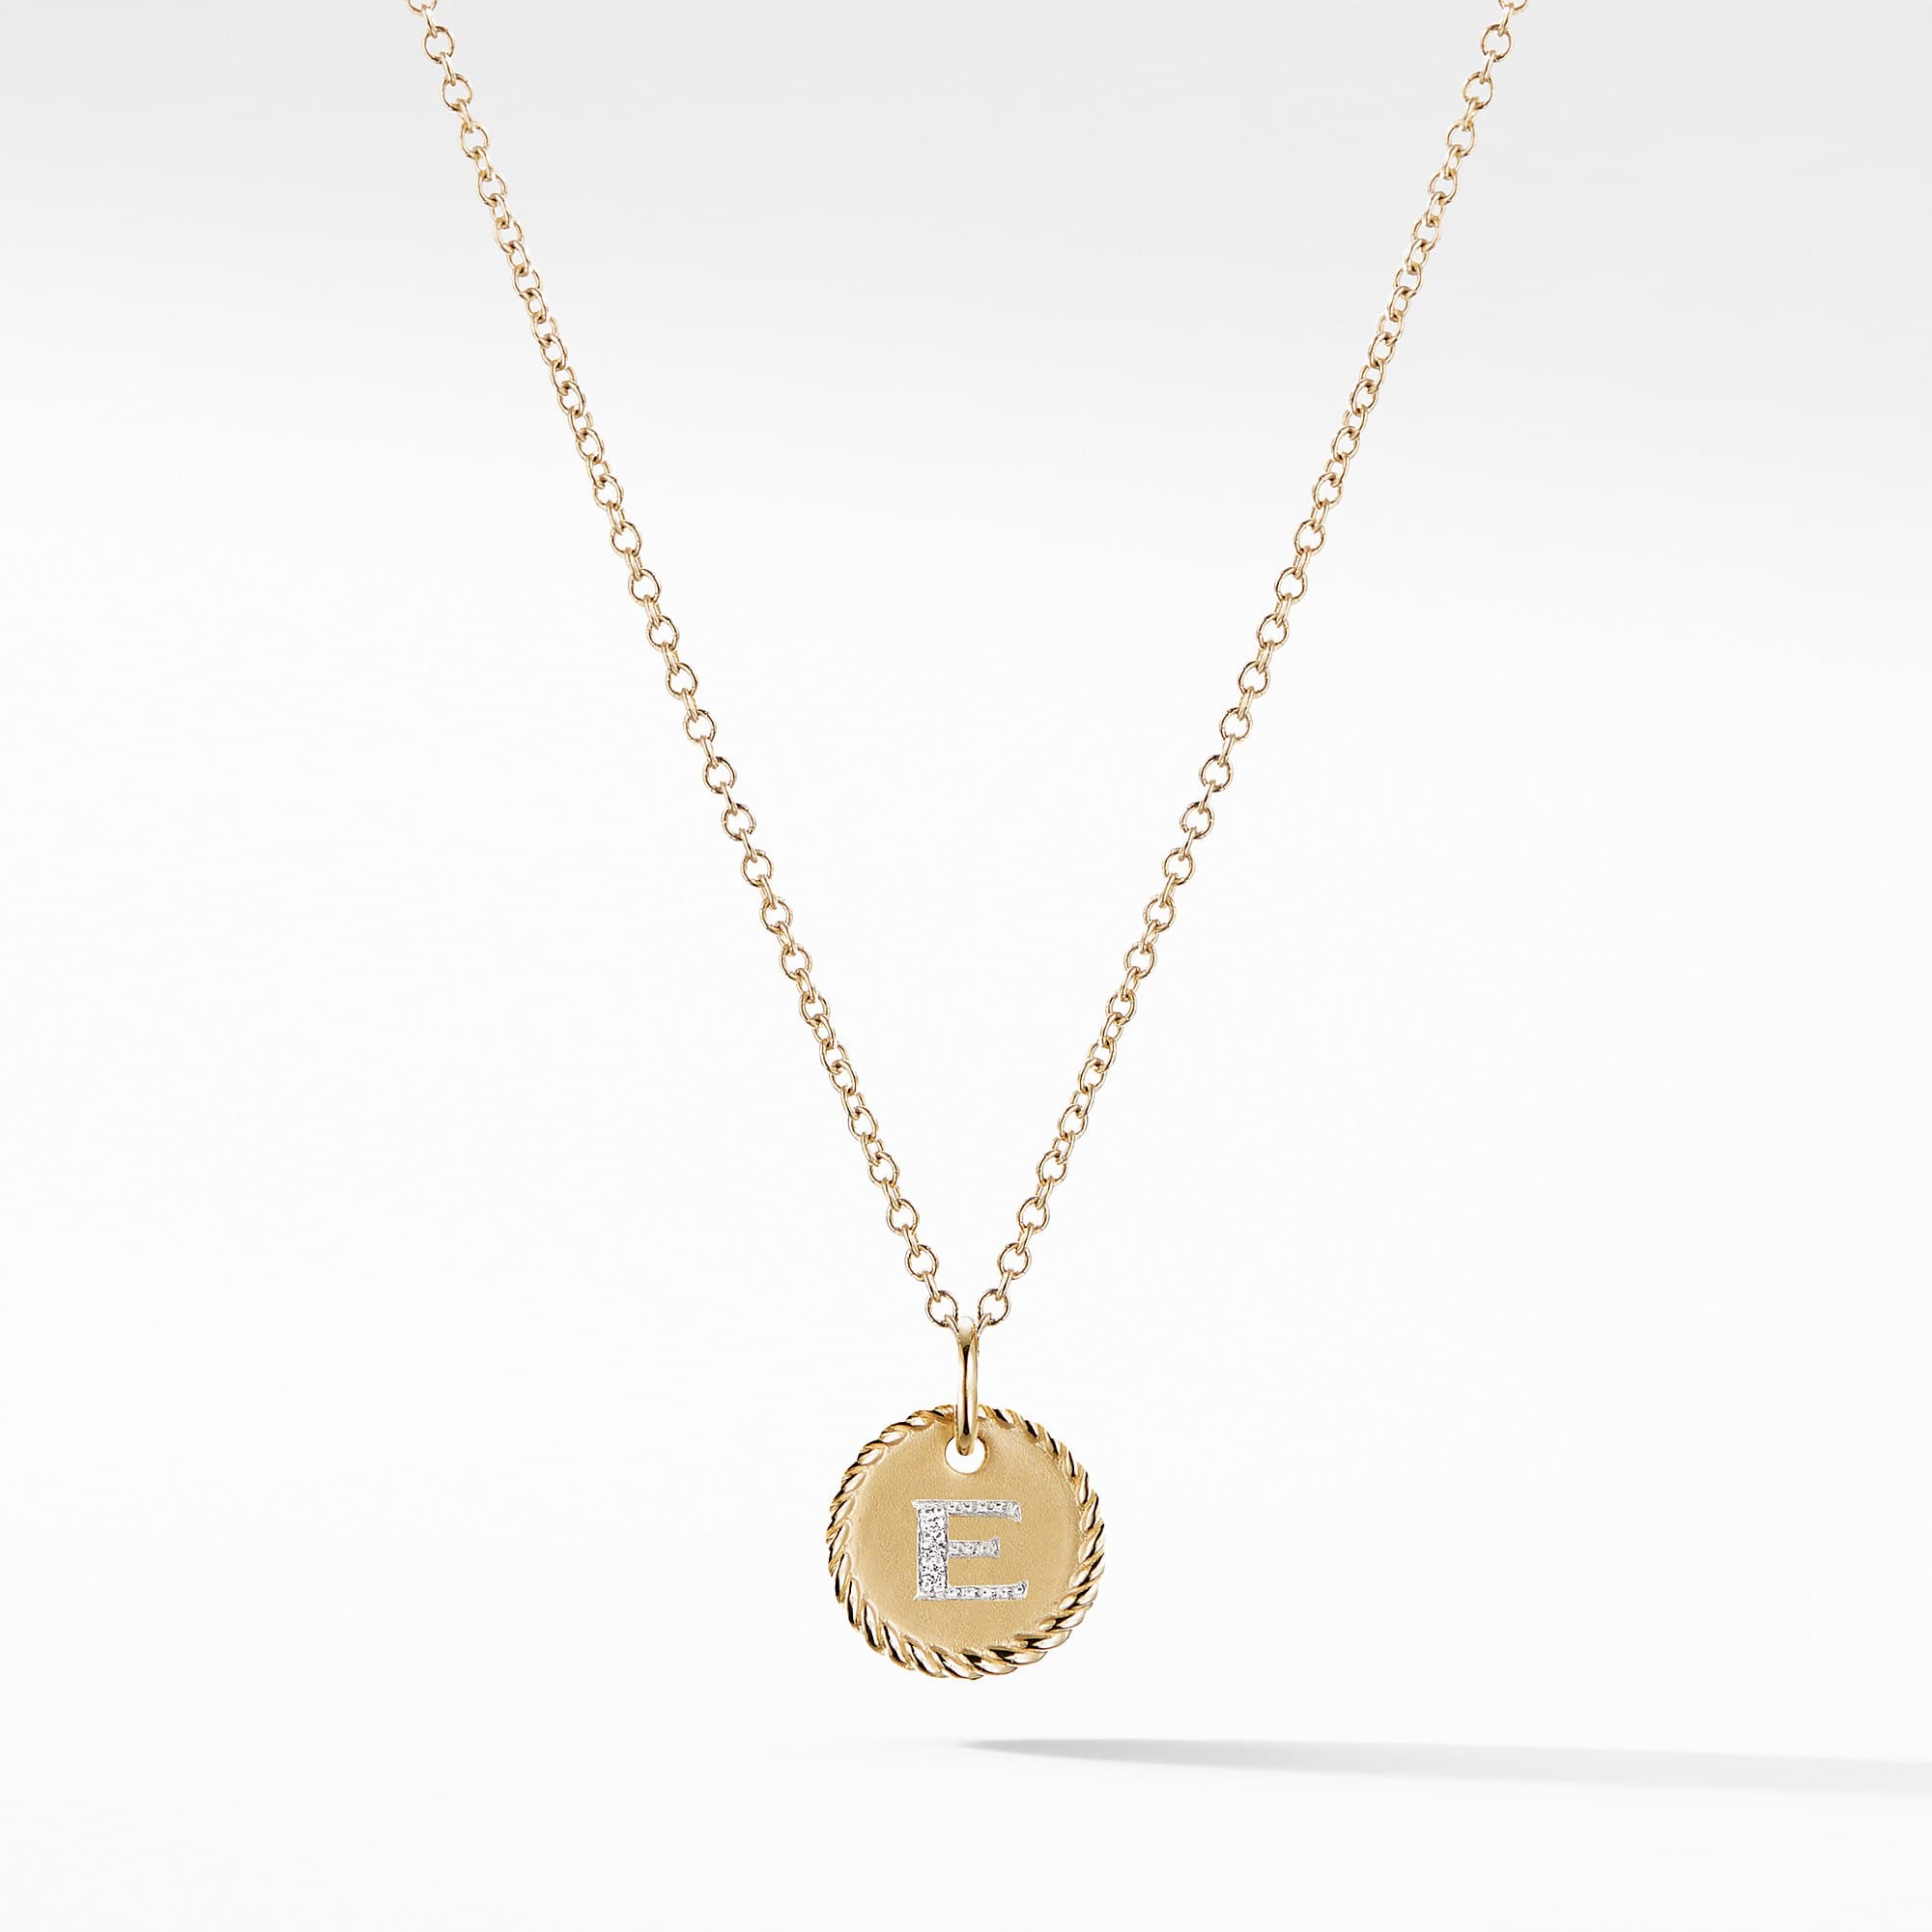 David Yurman E initial Charm Necklace with Diamonds in Yellow Gold